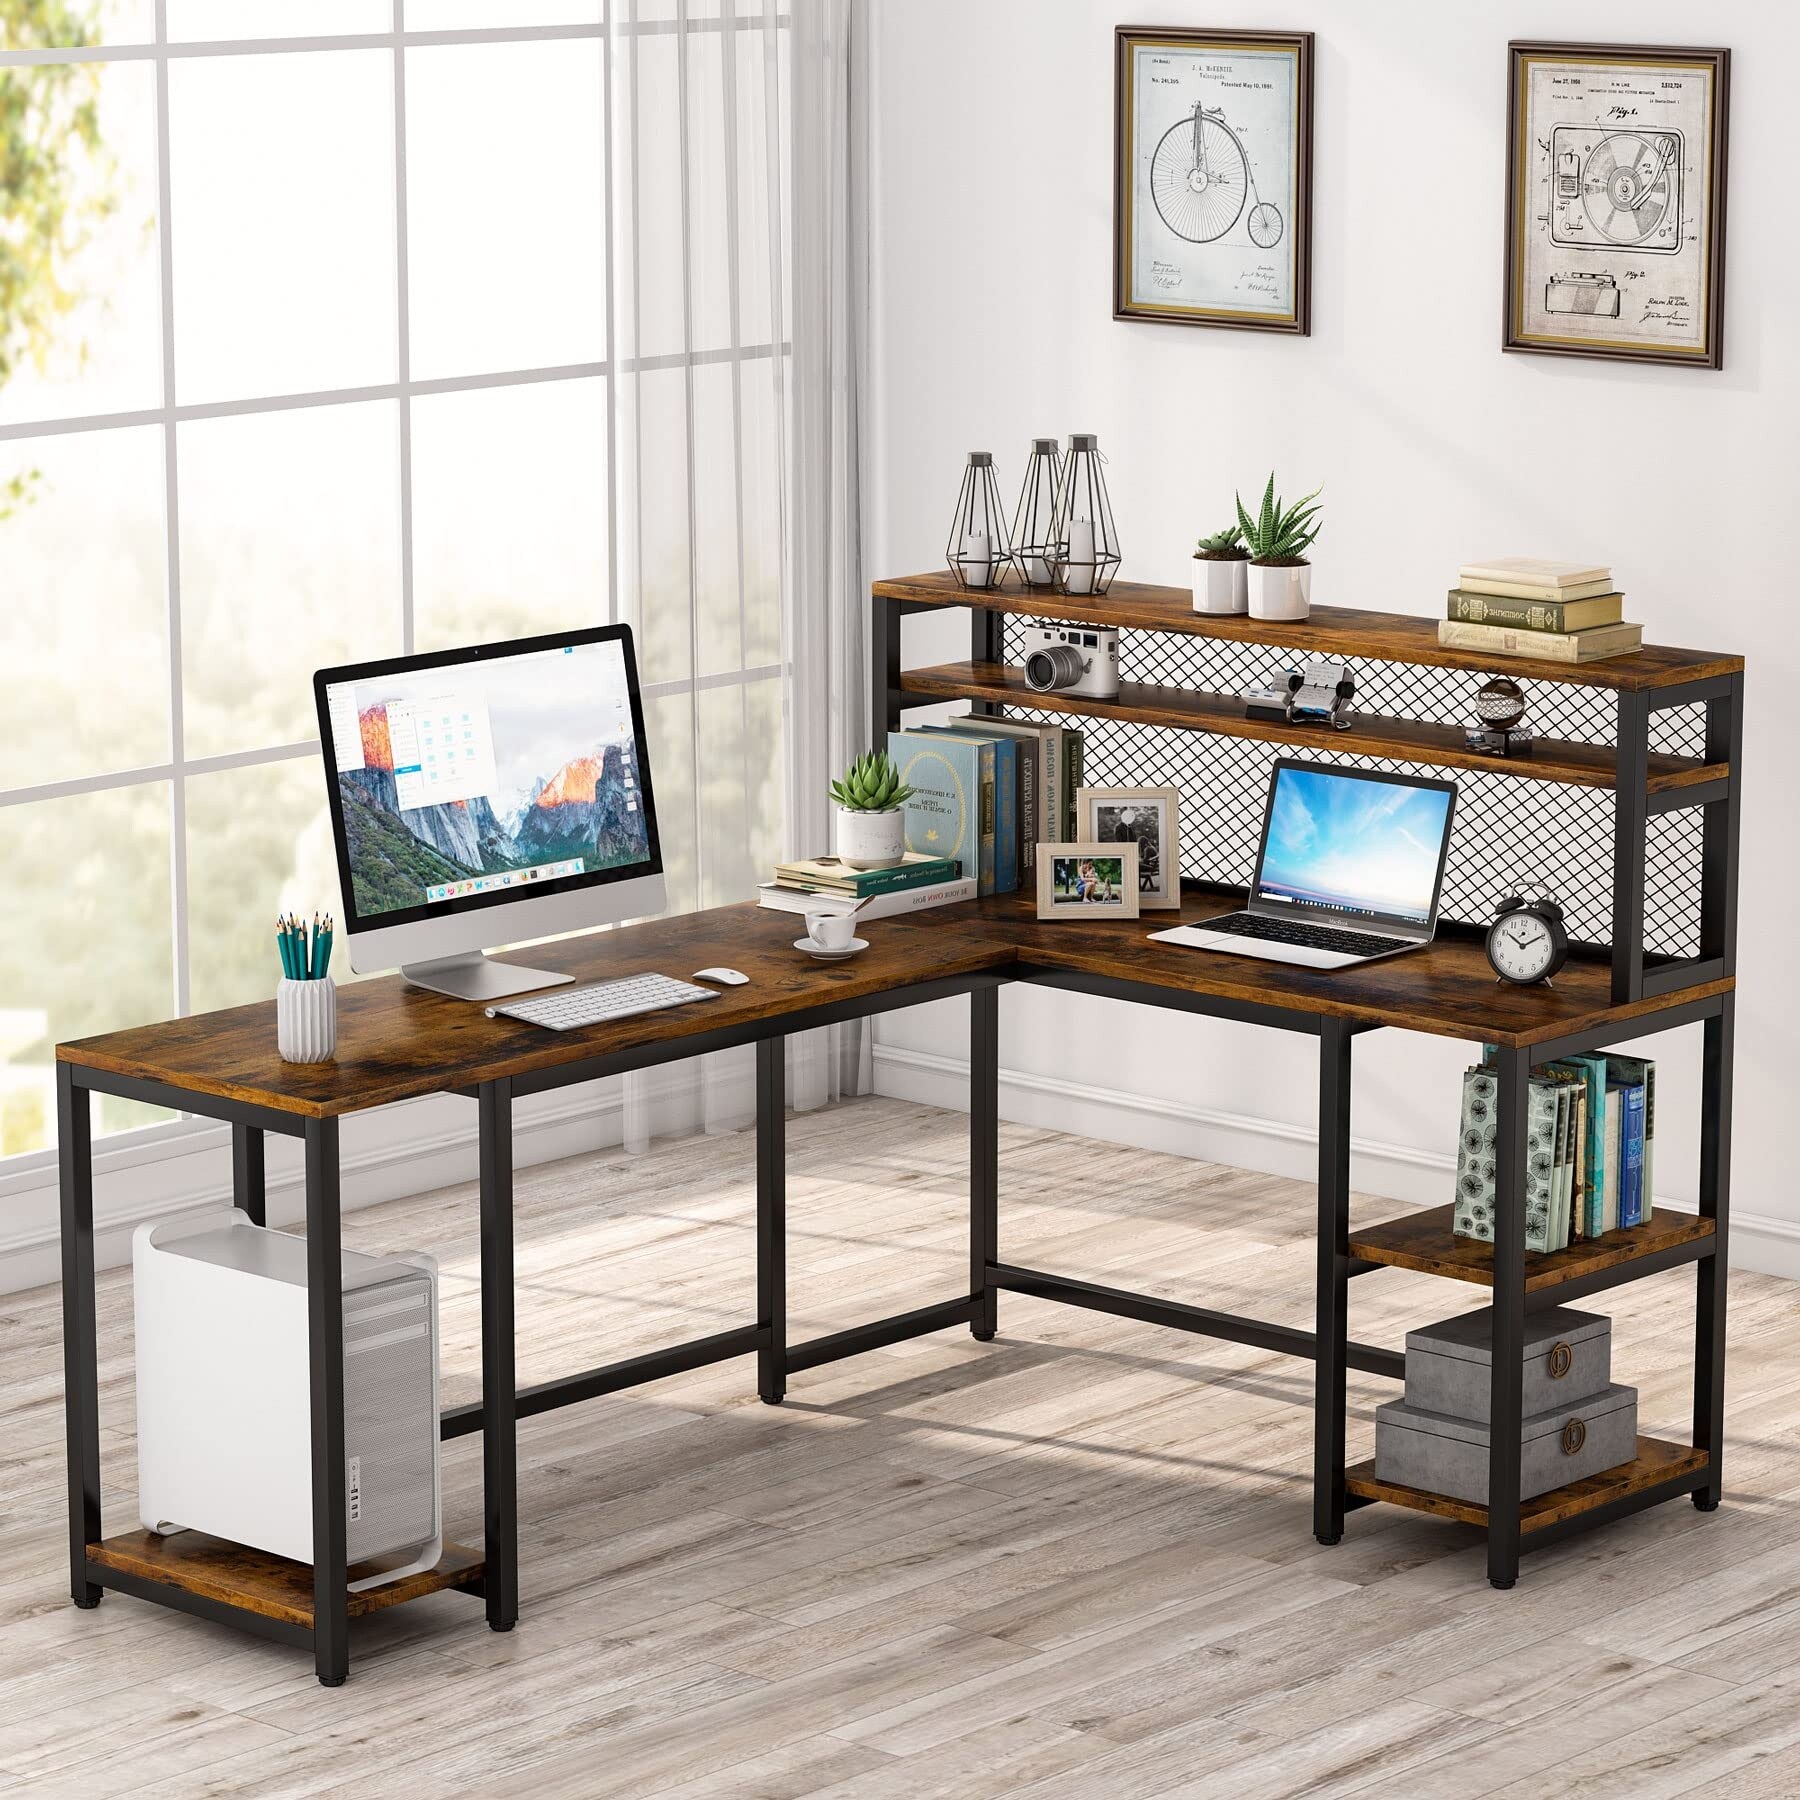 https://ak1.ostkcdn.com/images/products/is/images/direct/a5a35526fc604ea78e6d786ad705d38e5e7fed1a/Tribesigns-67-inch-L-Shaped-Computer-Desk-with-Hutch-and-Storage-Shelf.jpg